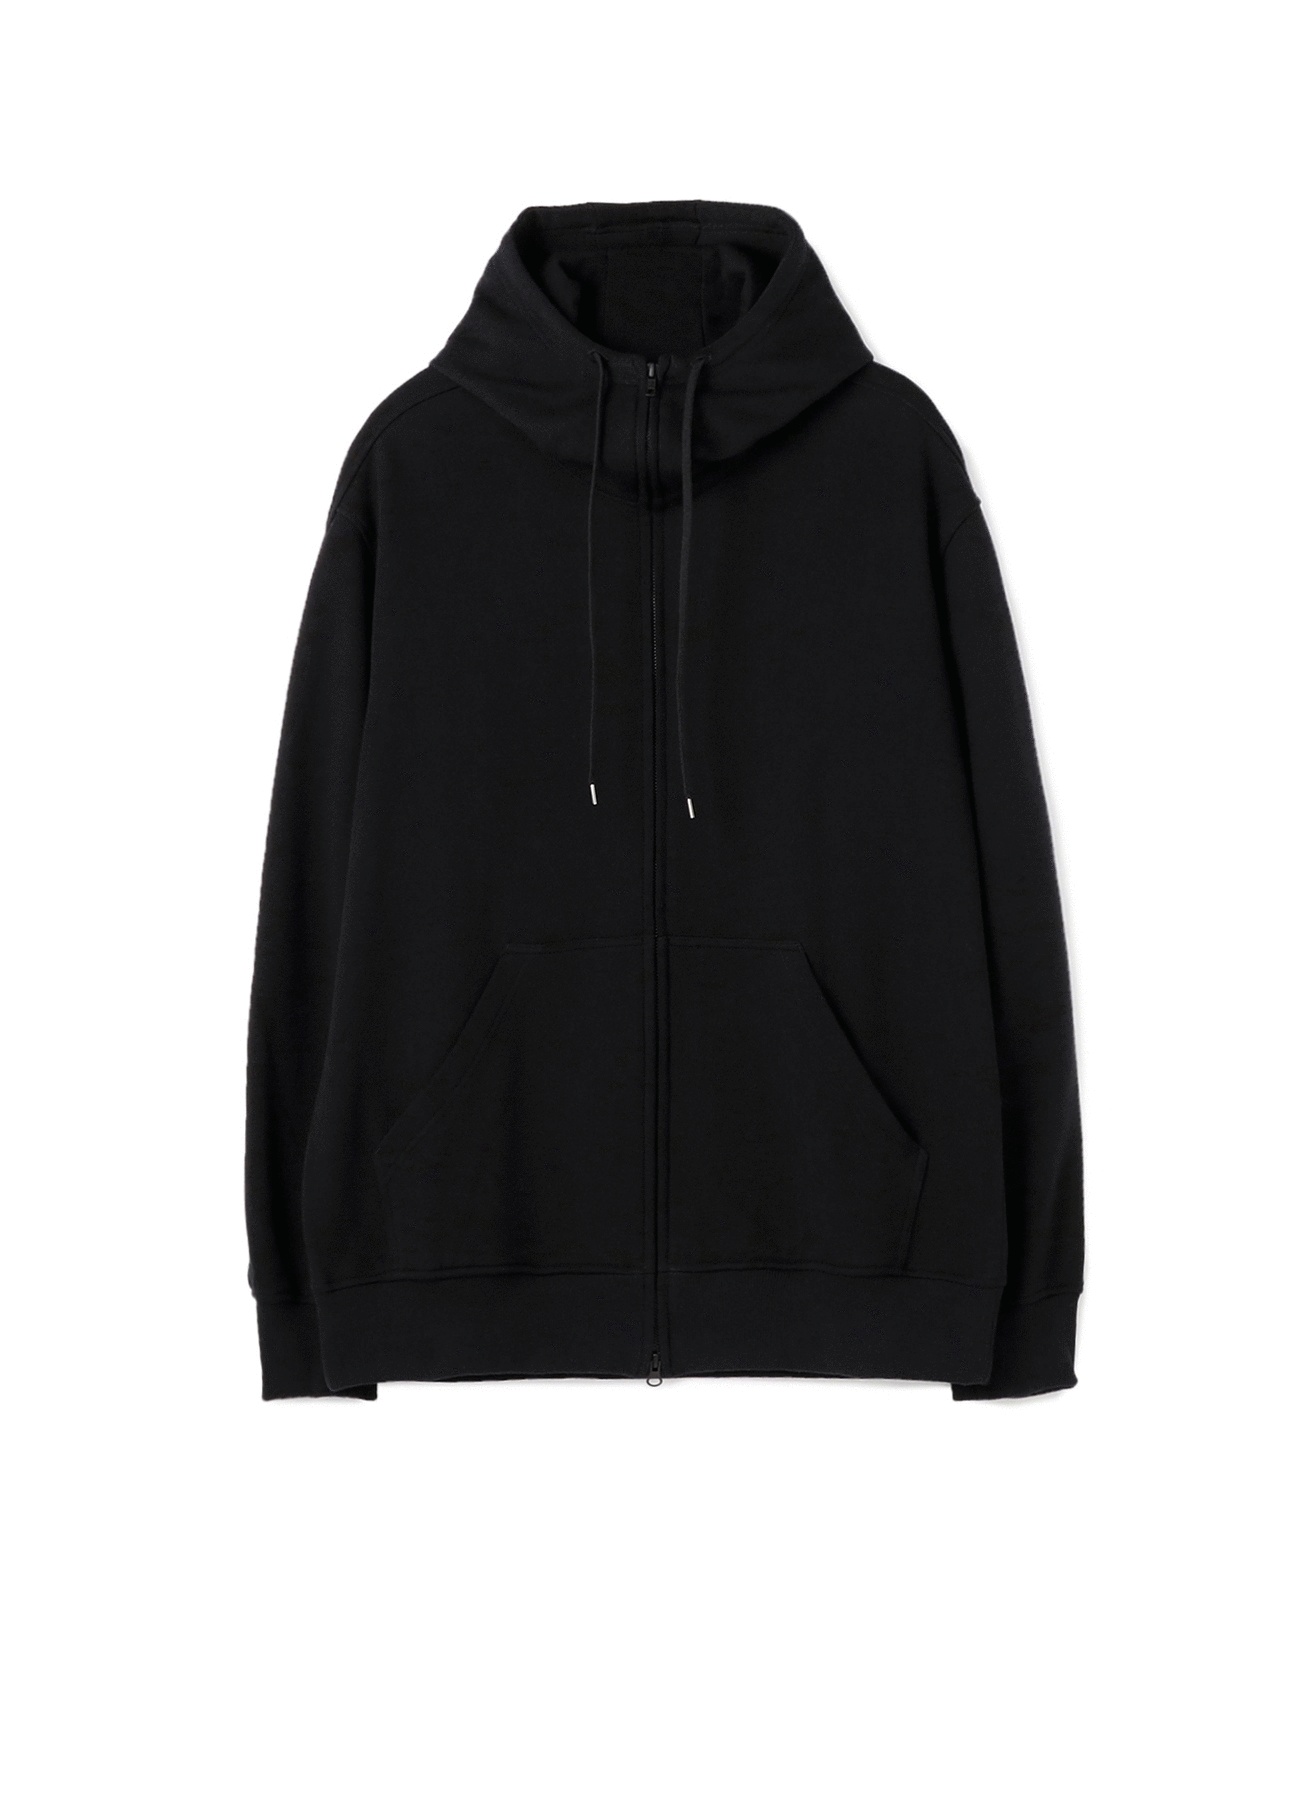 French Terry Stitch Work Red Lily Zipper Hoodie